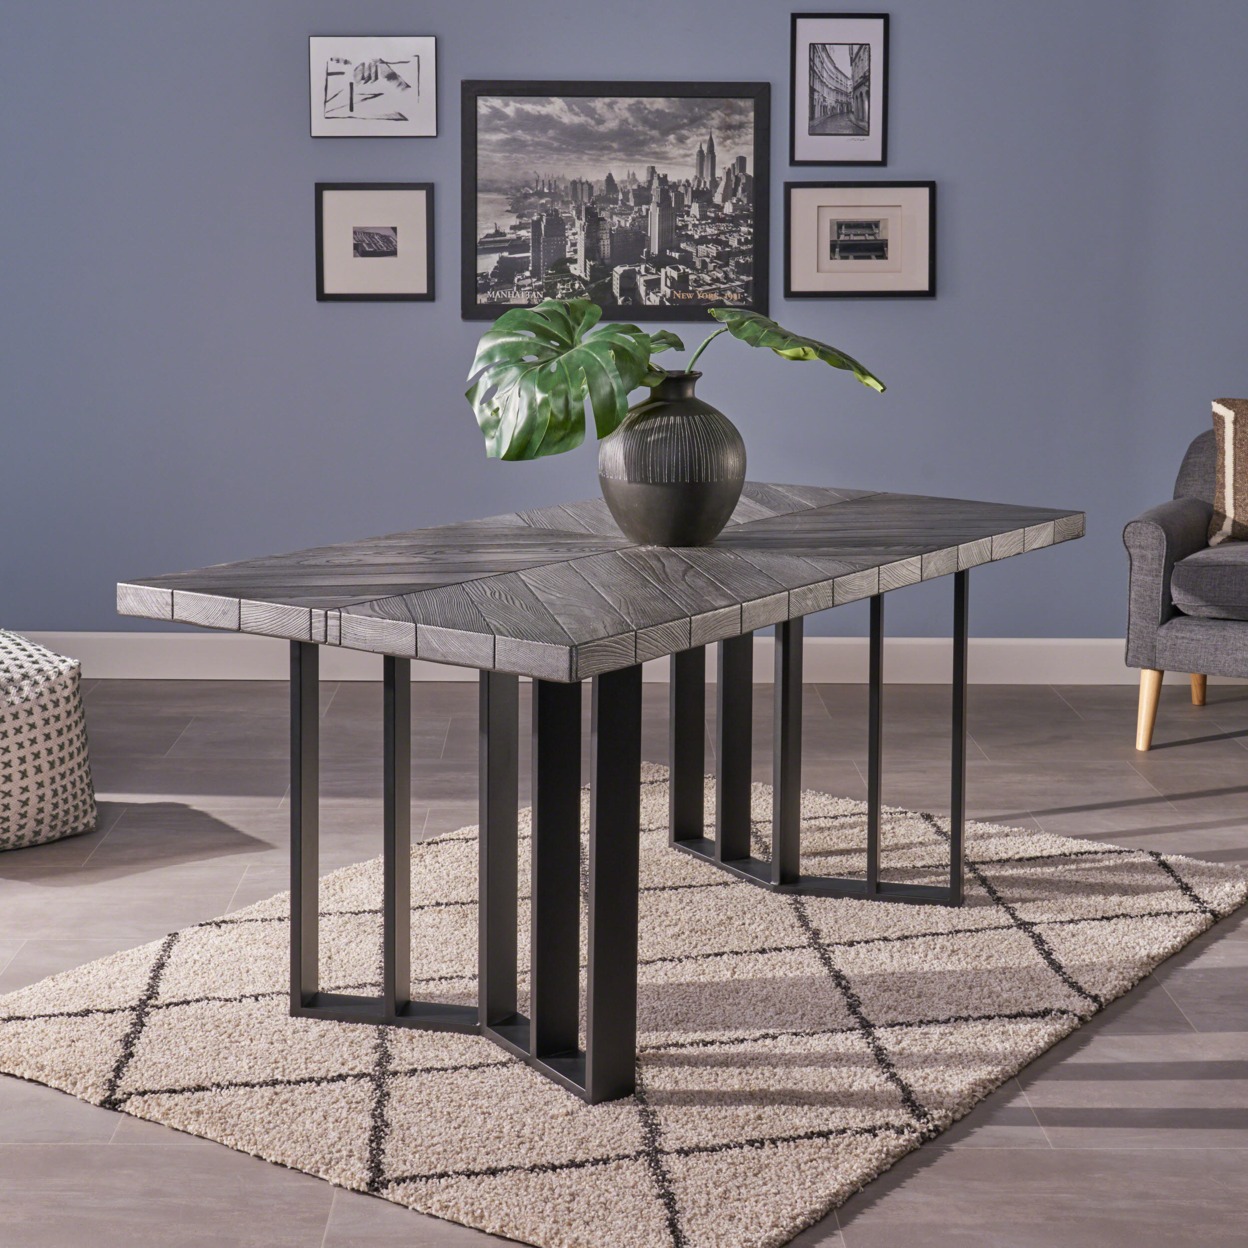 Santa Rosa Indoor Farmhouse Light Weight Concrete Dining Table - Textured Brown